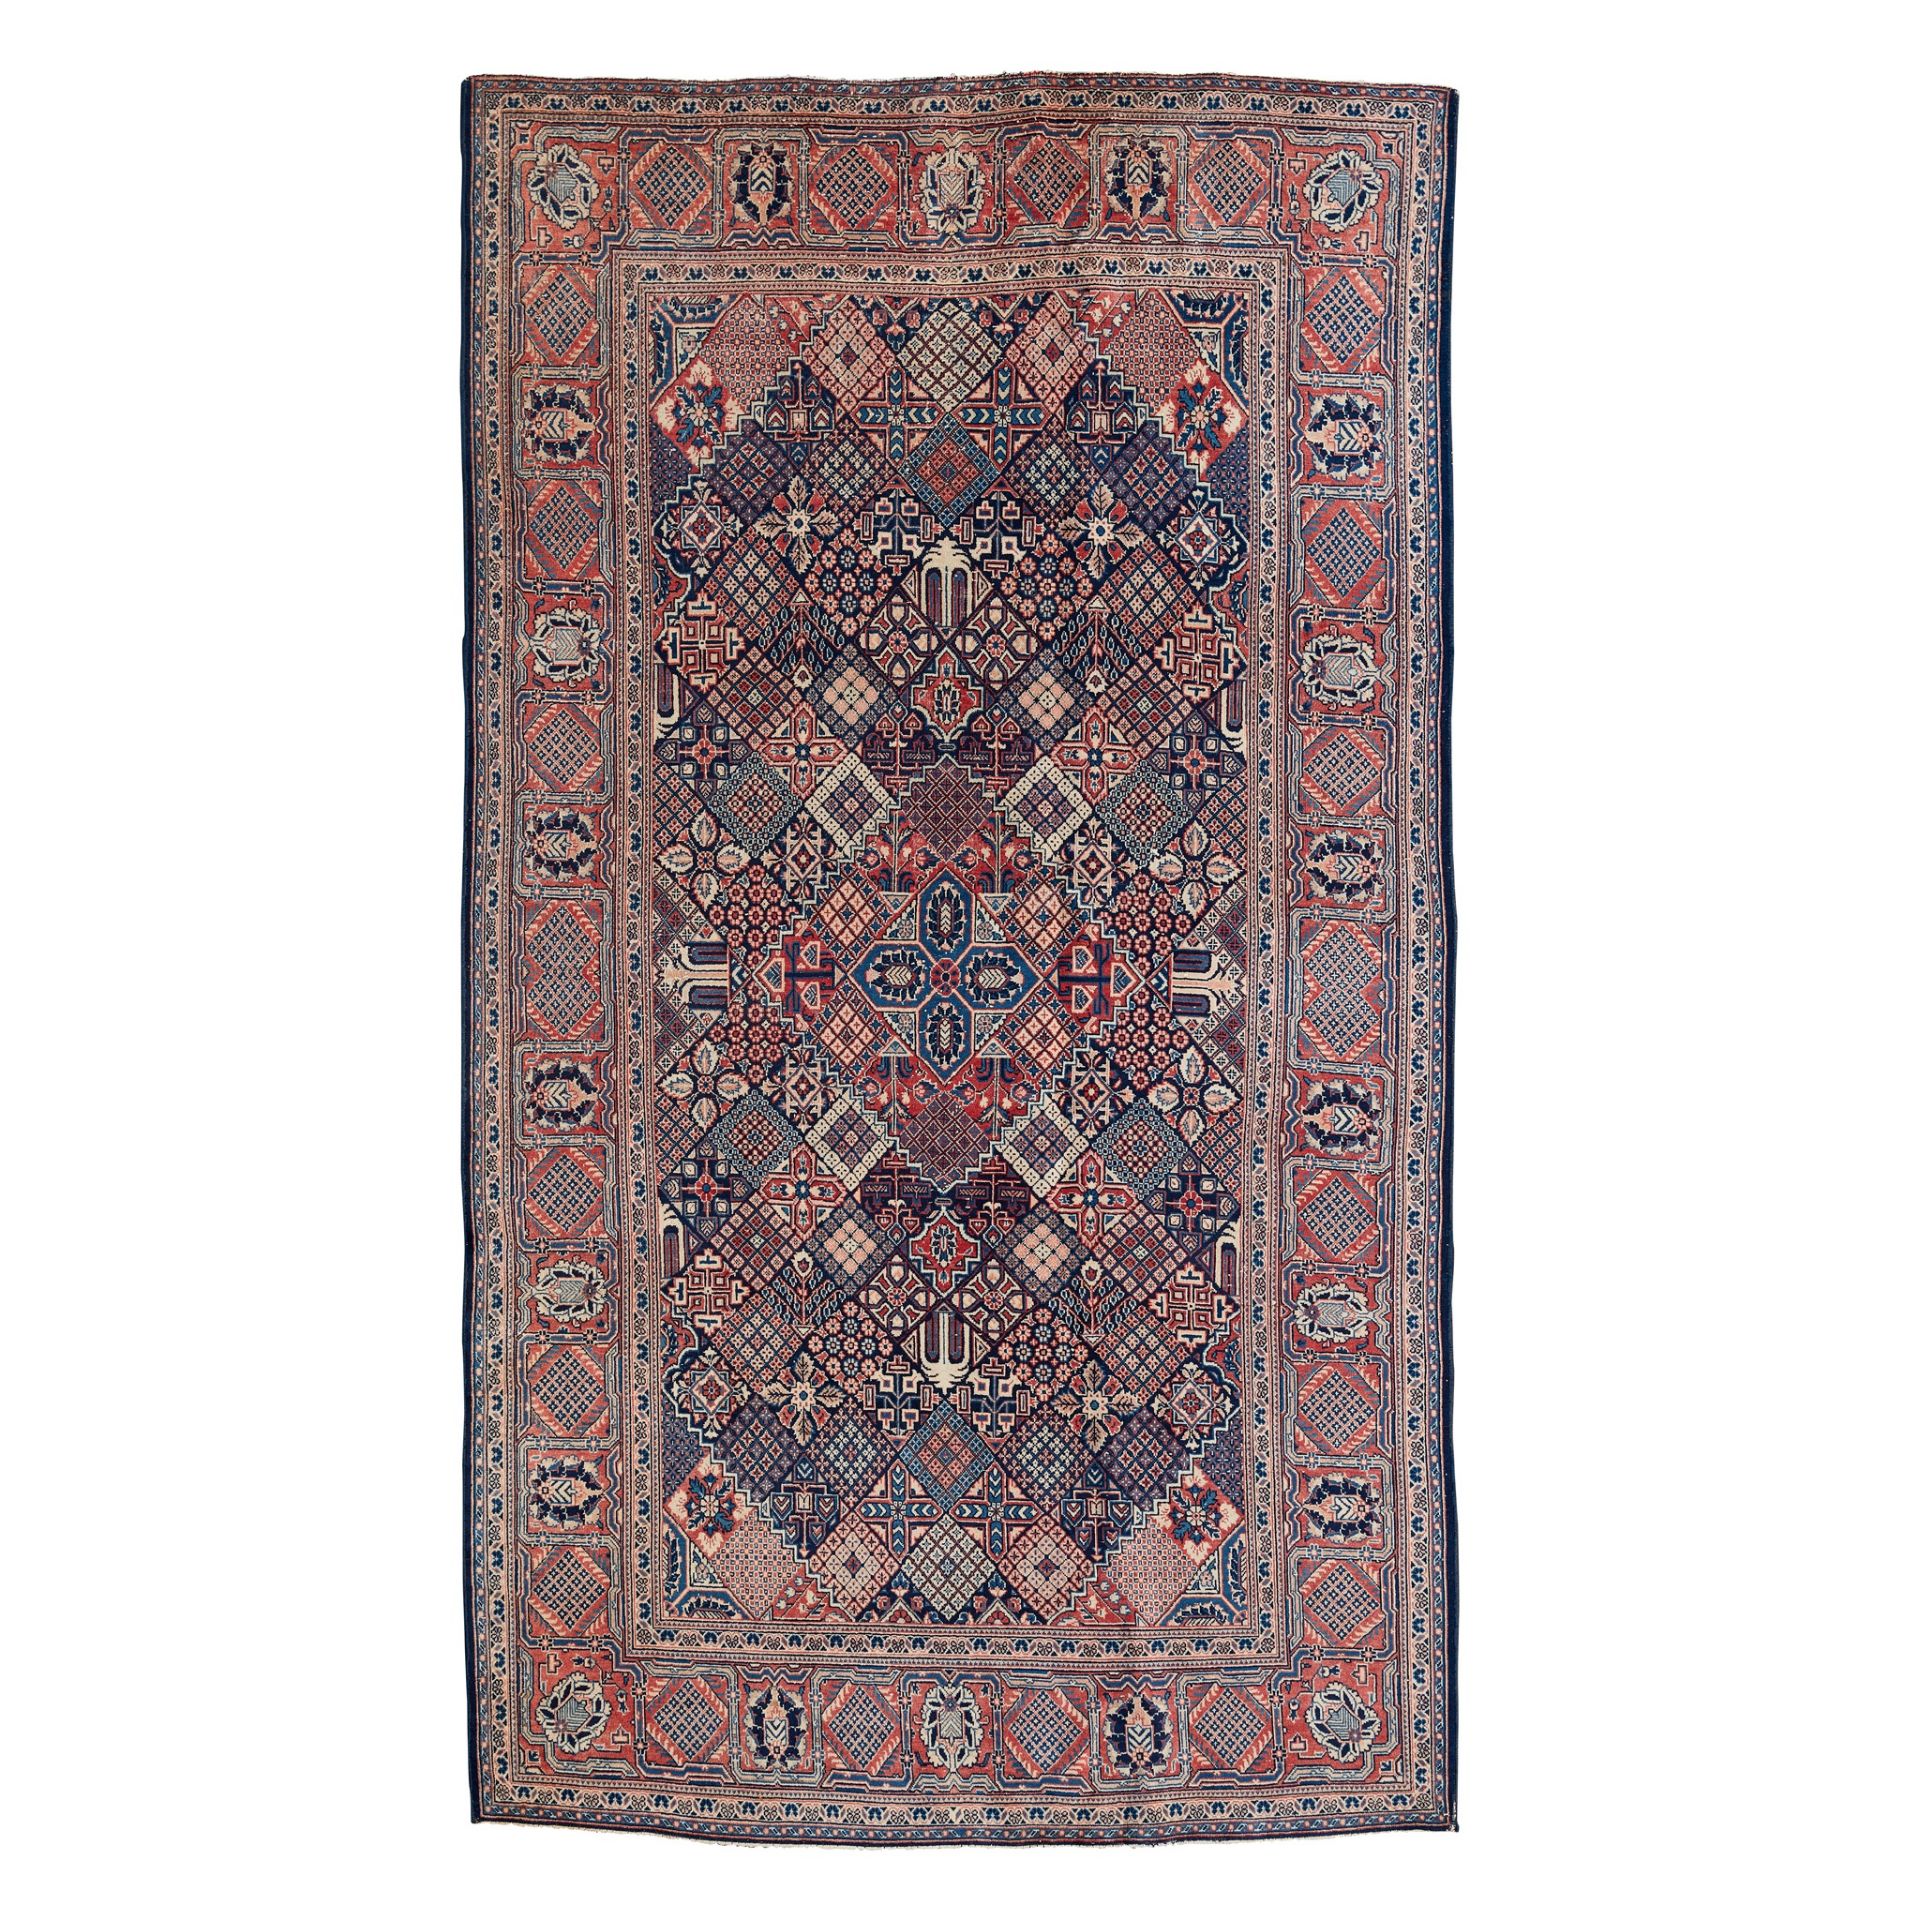 KASHAN RUG CENTRAL PERSIA, 20TH CENTURY